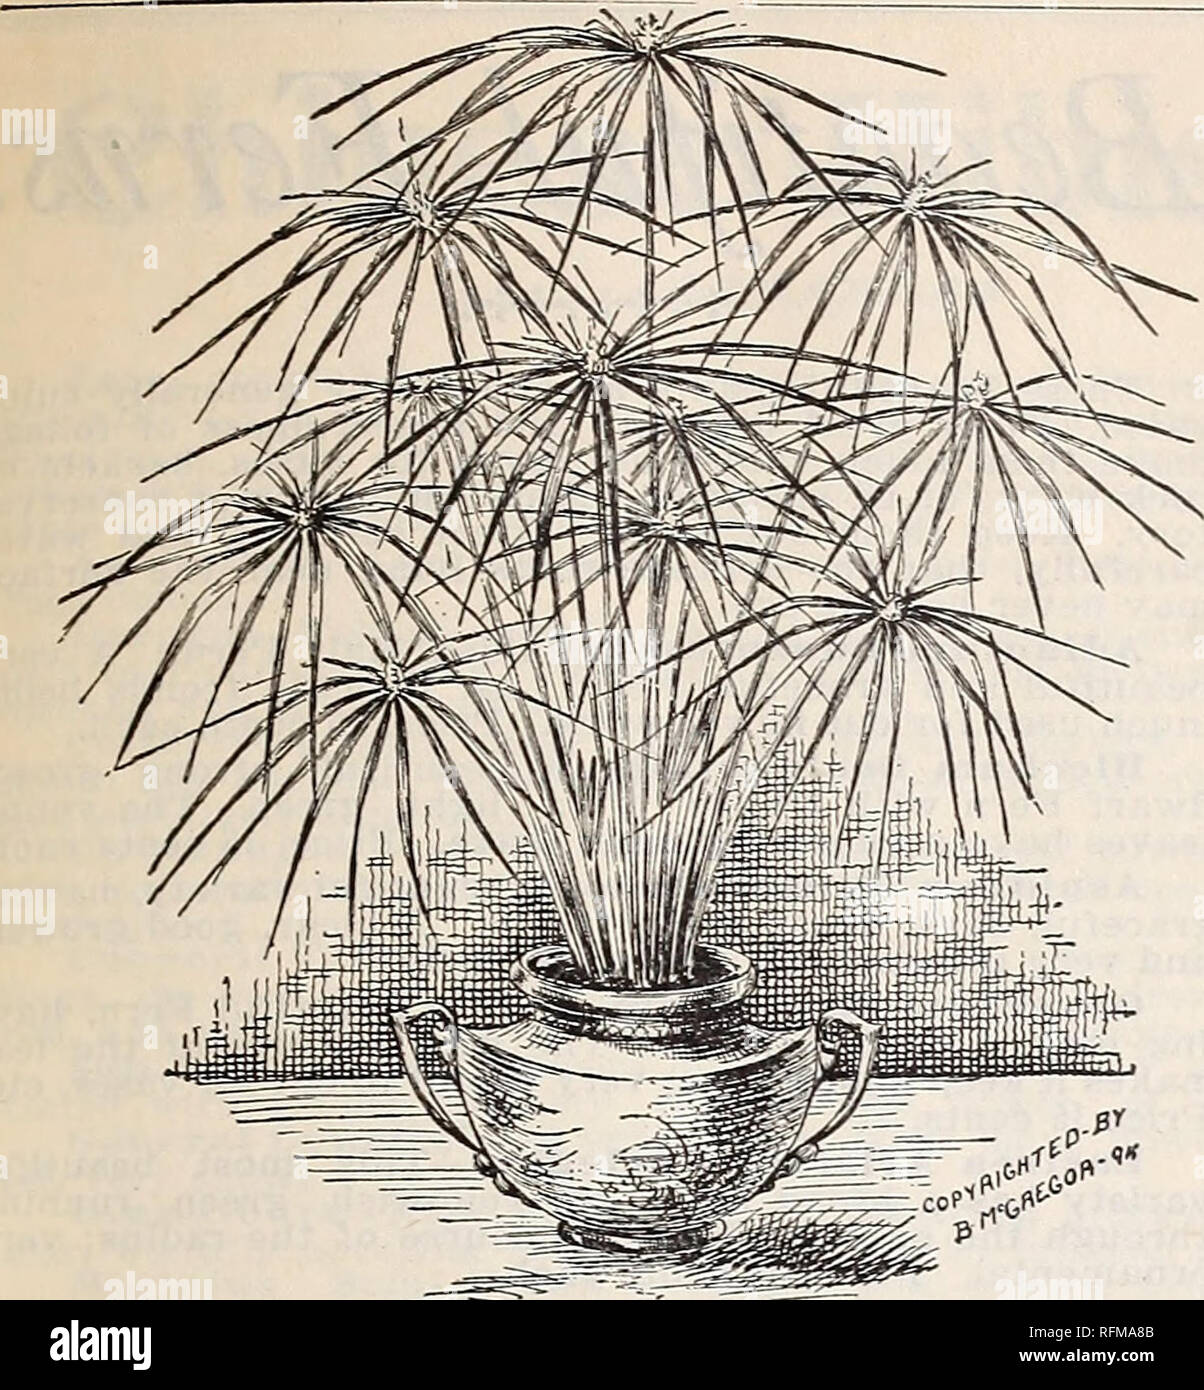 . Floral gems. Nurseries (Horticulture) Ohio Springfield Catalogs; Plants, Ornamental Catalogs; Flowers Catalogs; Bulbs (Plants) Catalogs. McGregor brothers, florists, Springfield, ohio.. 49 UMBRELLA PLANT (Cyperus Alternifolius.) Umbrella ^Plant. (cyperus alternifolius-) An ornamental grass, throwing- up stems about two feet high, surmounted at the top with a whorl of leaves, diverging horizontally, giving it a very curious appear- ance. Splendid for the center of vases or as a water plant. Price, 10 cents each; large, handsome plants, 20 cents each. «* Eranthemum PulcheUum * This plant produ Stock Photo